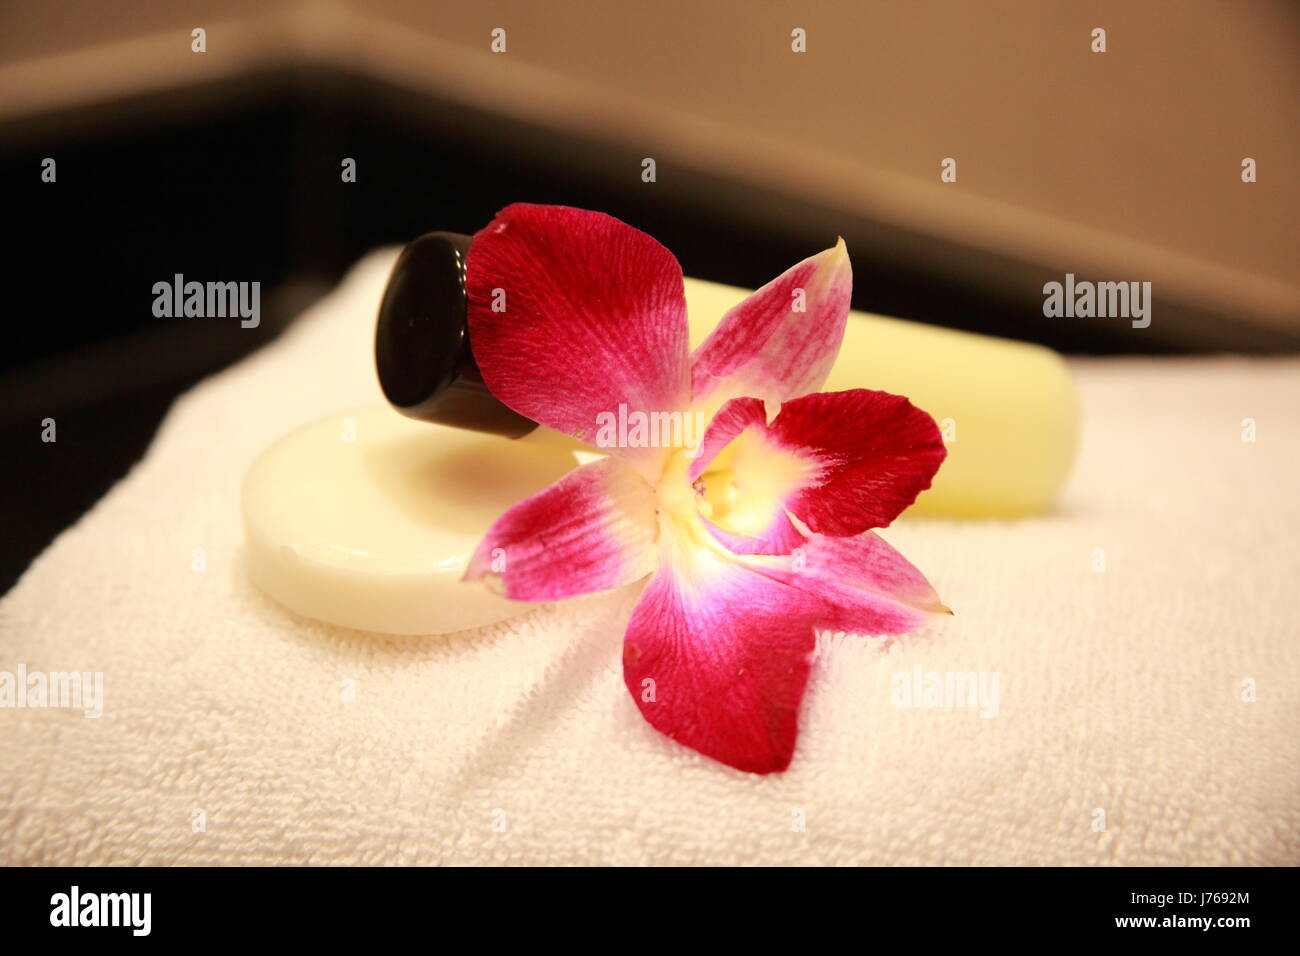 flower plant towel soap cosmetic amenities bathroom spa mineral spring Stock Photo